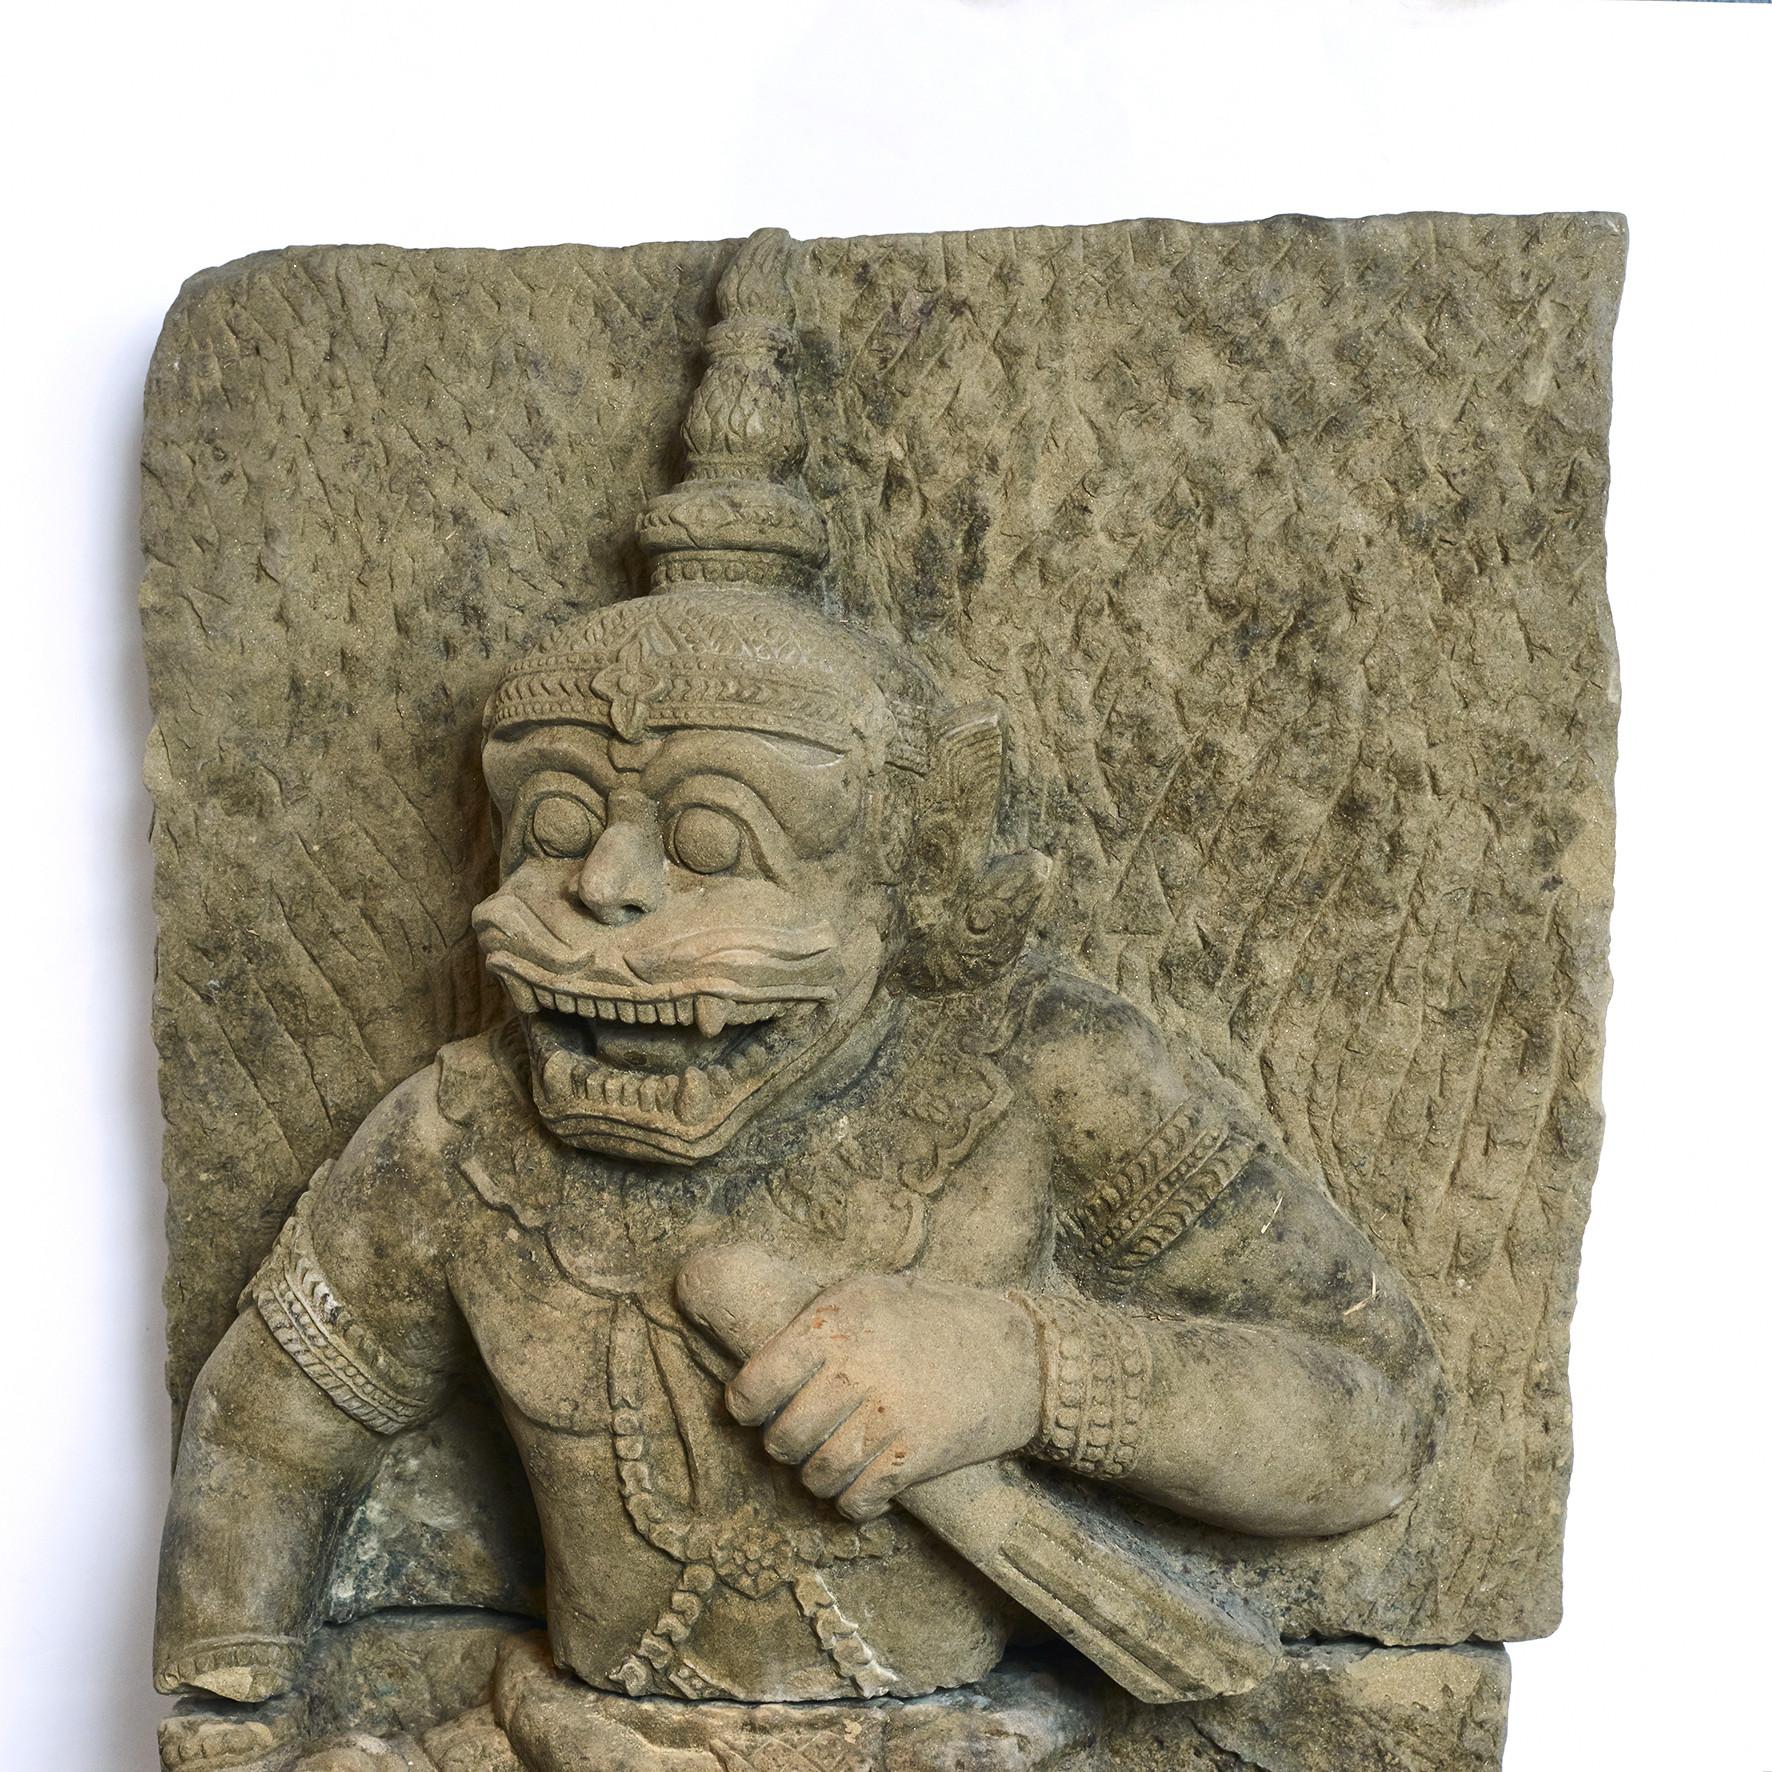 Large Hanuman sculpture carved in sandstone.
Original in 2 parts, professionally assembled by a stonemason with special screws.
Mounted on light sandstone base.
Originates from a temple / pagoda of Arakan, a coastal geographic region in southern